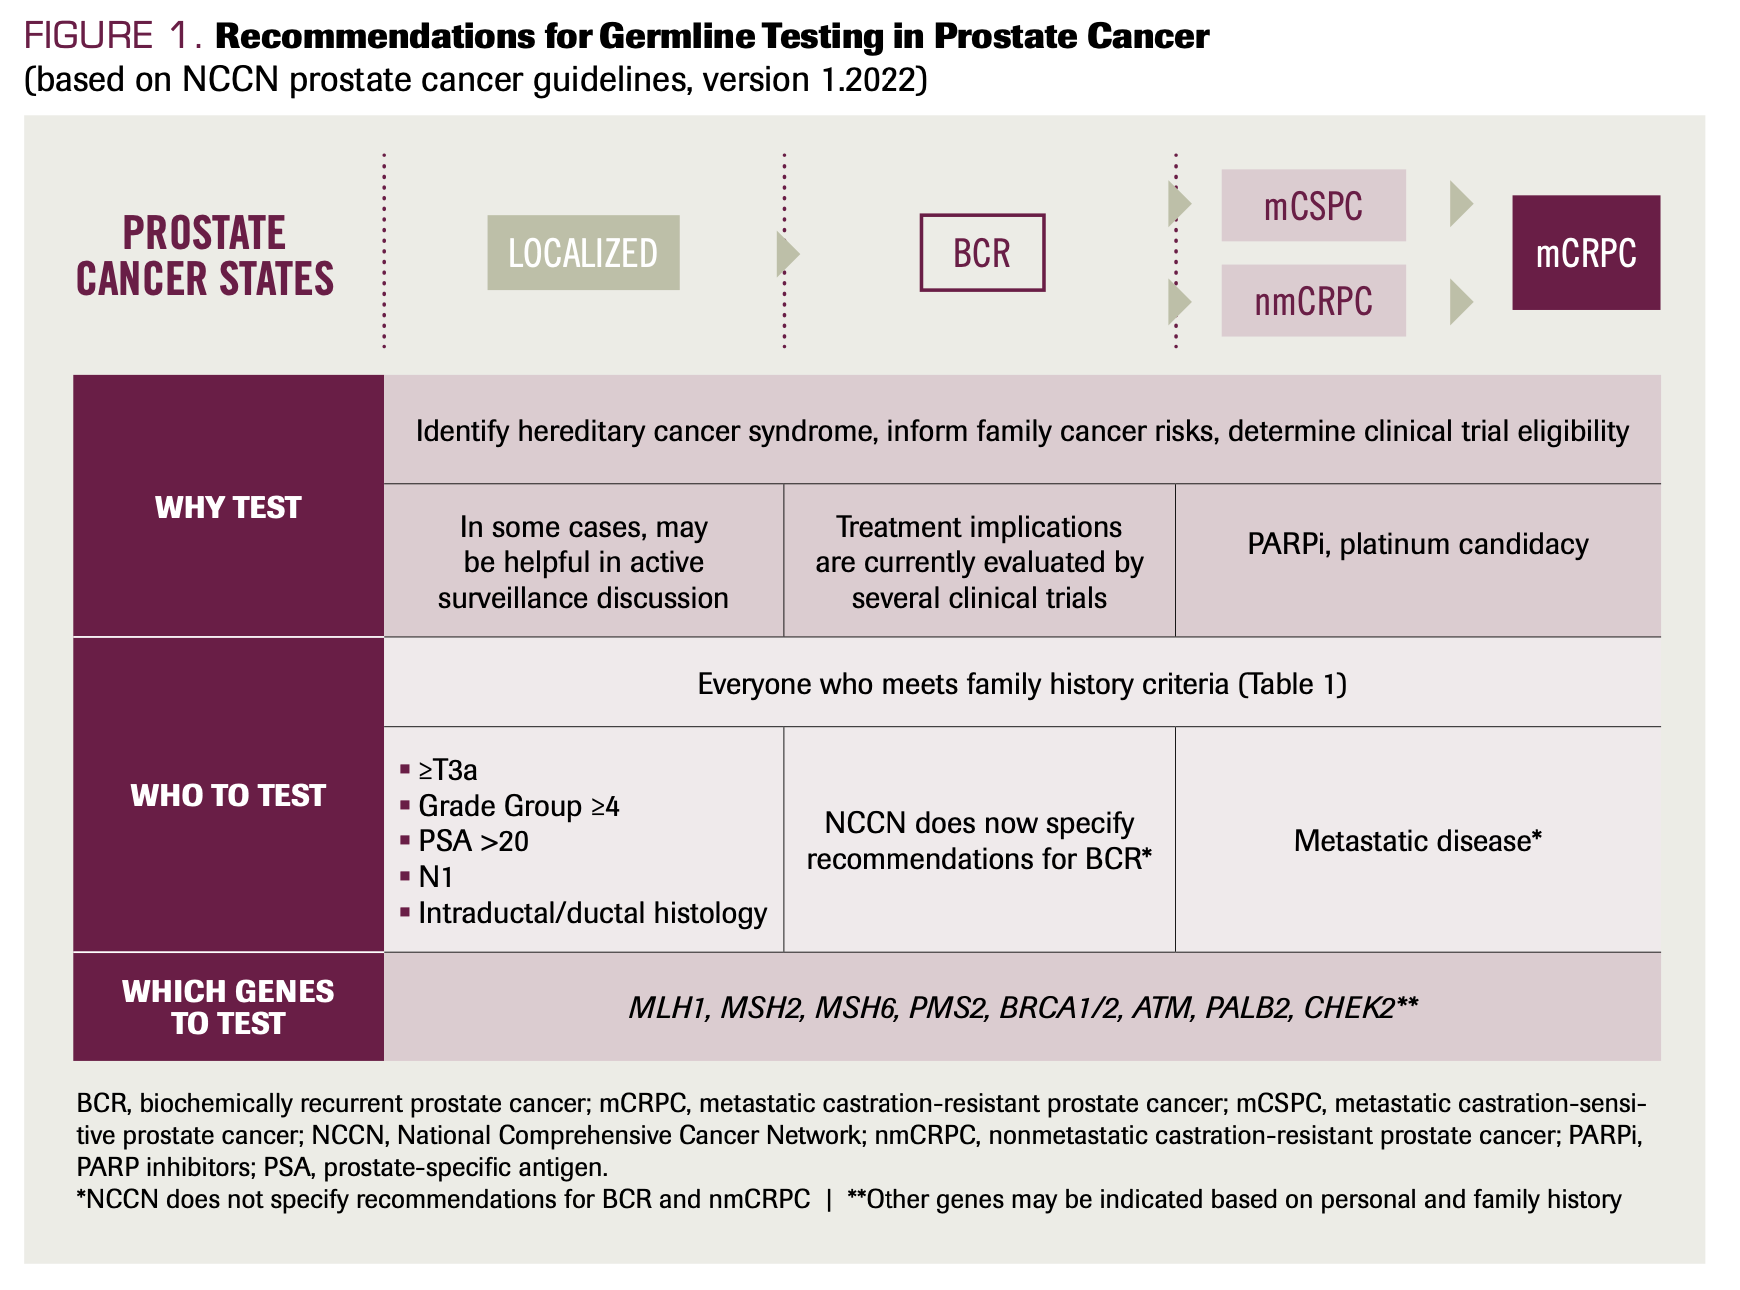 FIGURE 1. Recommendations for Germline Testing in Prostate Cancer (based on NCCN prostate cancer guidelines, version 1.2022)